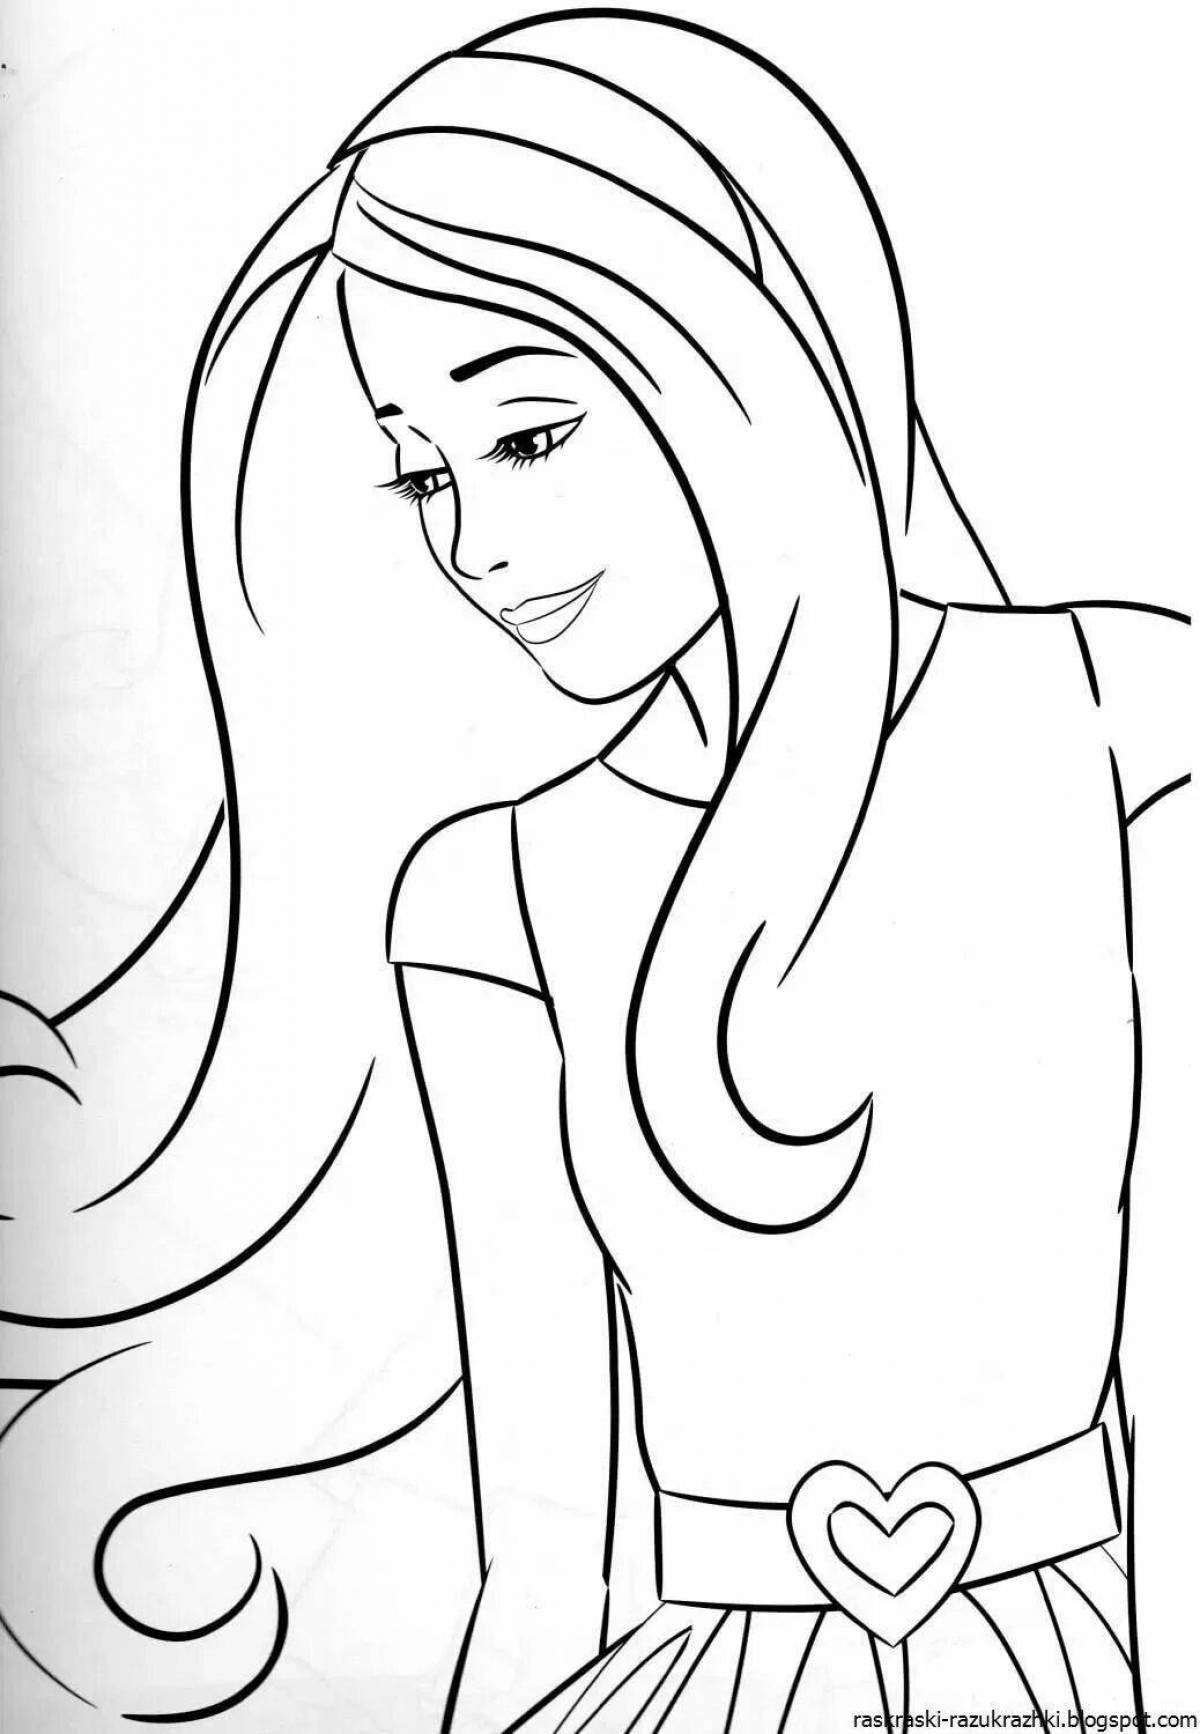 Relaxing coloring book easy